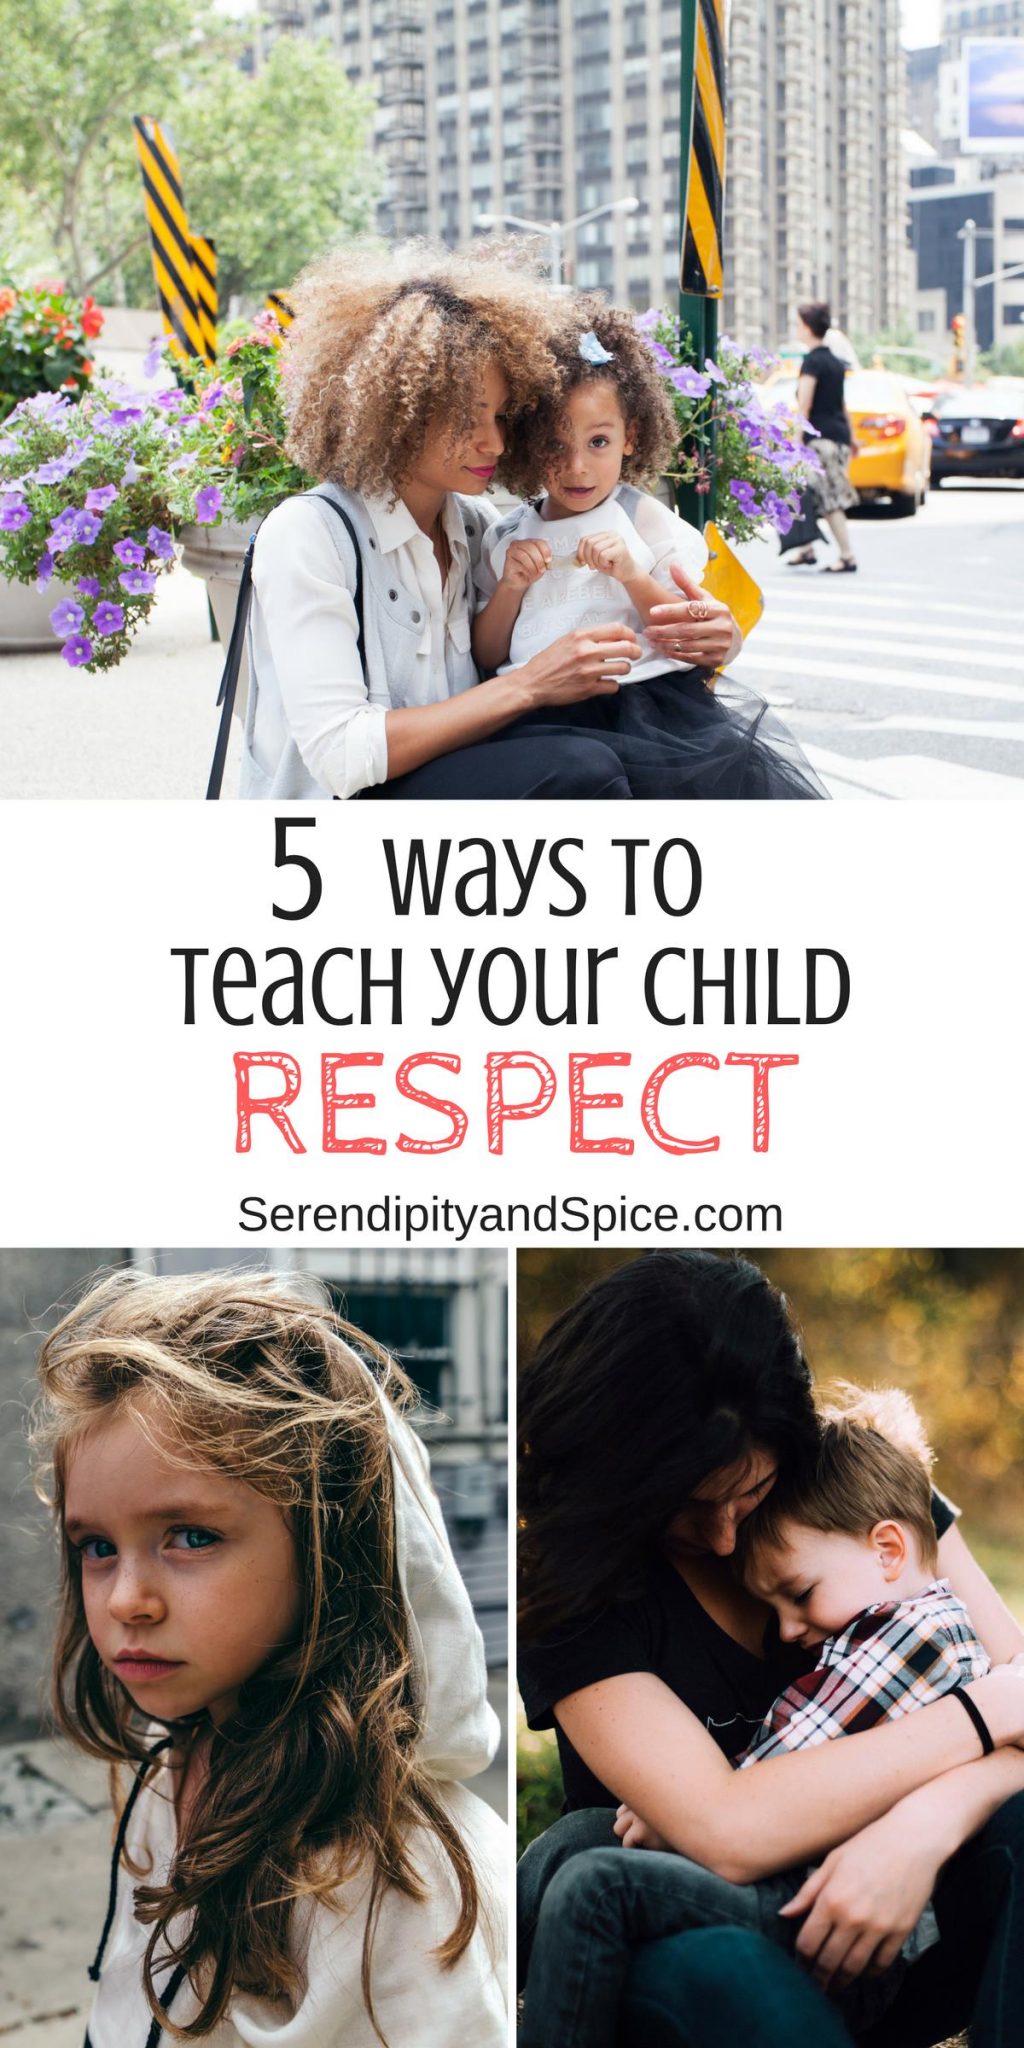 5 Ways To Teach Your Child Respect